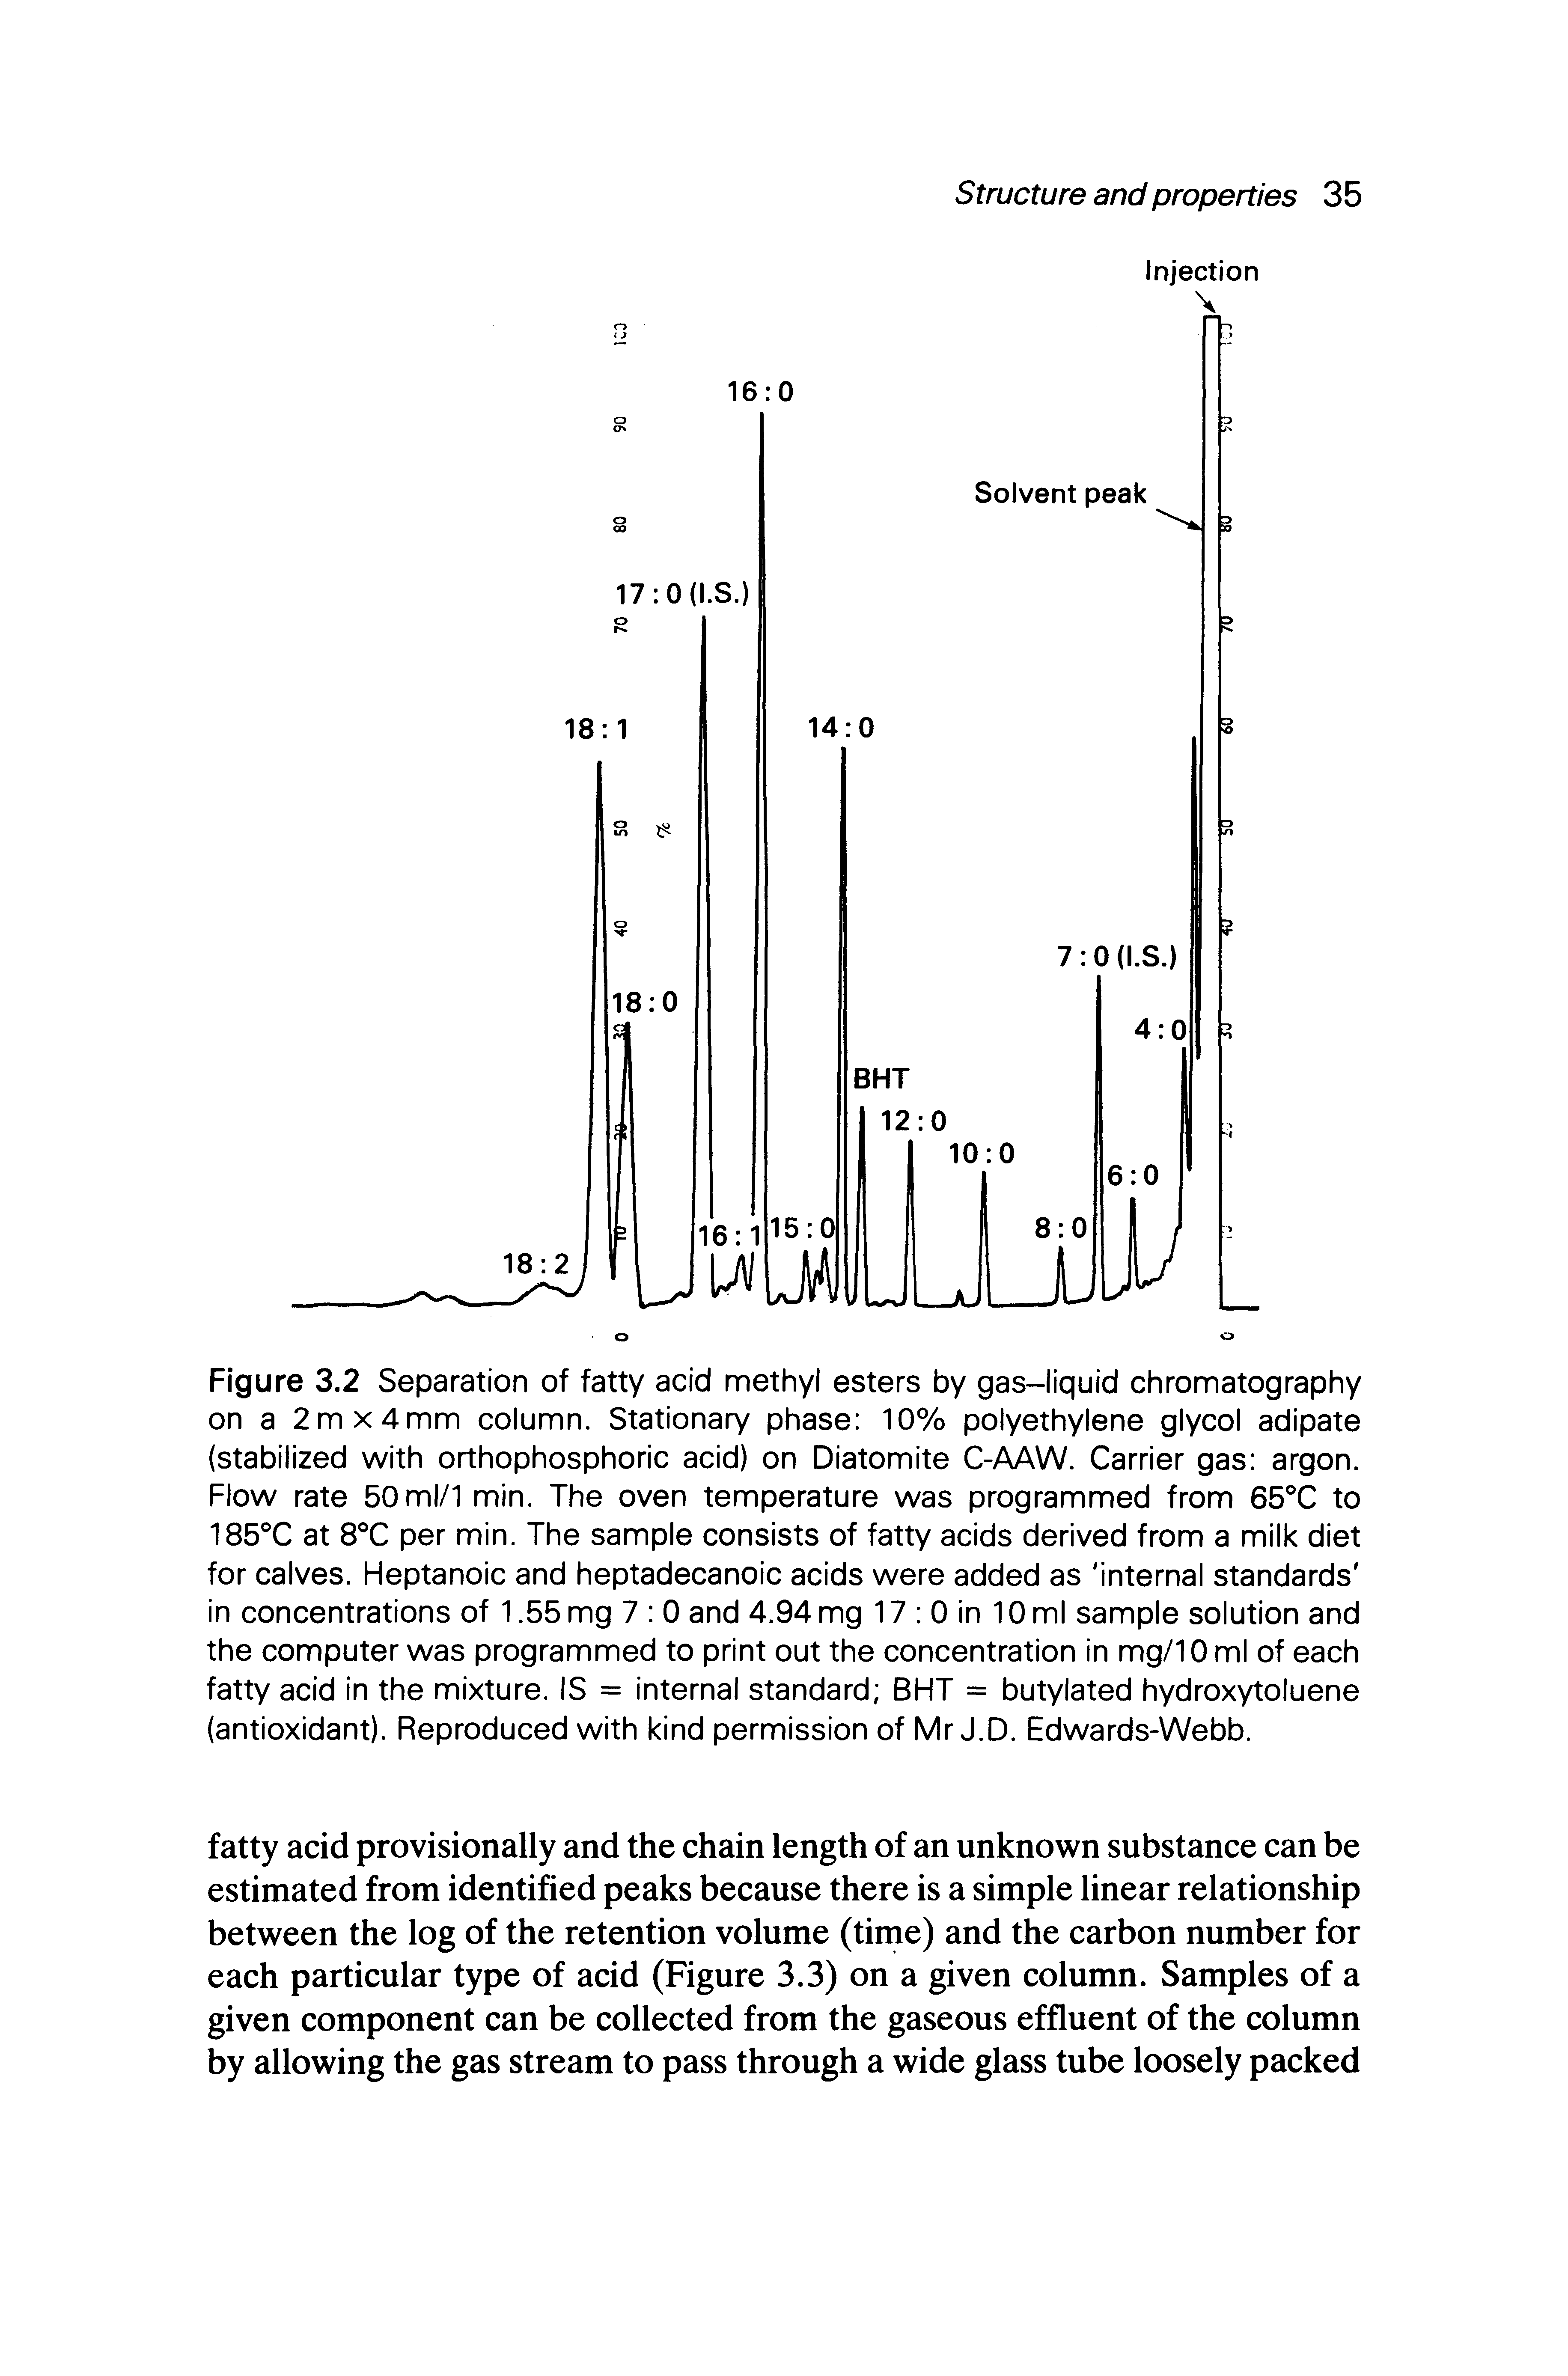 Figure 3.2 Separation of fatty acid methyl esters by gas-liquid chromatography on a 2mx4mm column. Stationary phase 10% polyethylene glycol adipate (stabilized with orthophosphoric acid) on Diatomite C-AAW. Carrier gas argon. Flow rate 50ml/1 min. The oven temperature was programmed from 65°C to 185°C at 8°C per min. The sample consists of fatty acids derived from a milk diet for calves. Heptanoic and heptadecanoic acids were added as internal standards in concentrations of 1.55 mg 7 0 and 4.94 mg 17 0 in 10 ml sample solution and the computer was programmed to print out the concentration in mg/10 ml of each fatty acid In the mixture. IS = internal standard BHT = butylated hydroxytoluene (antioxidant). Reproduced with kind permission of Mr J.D. Edwards-Webb.